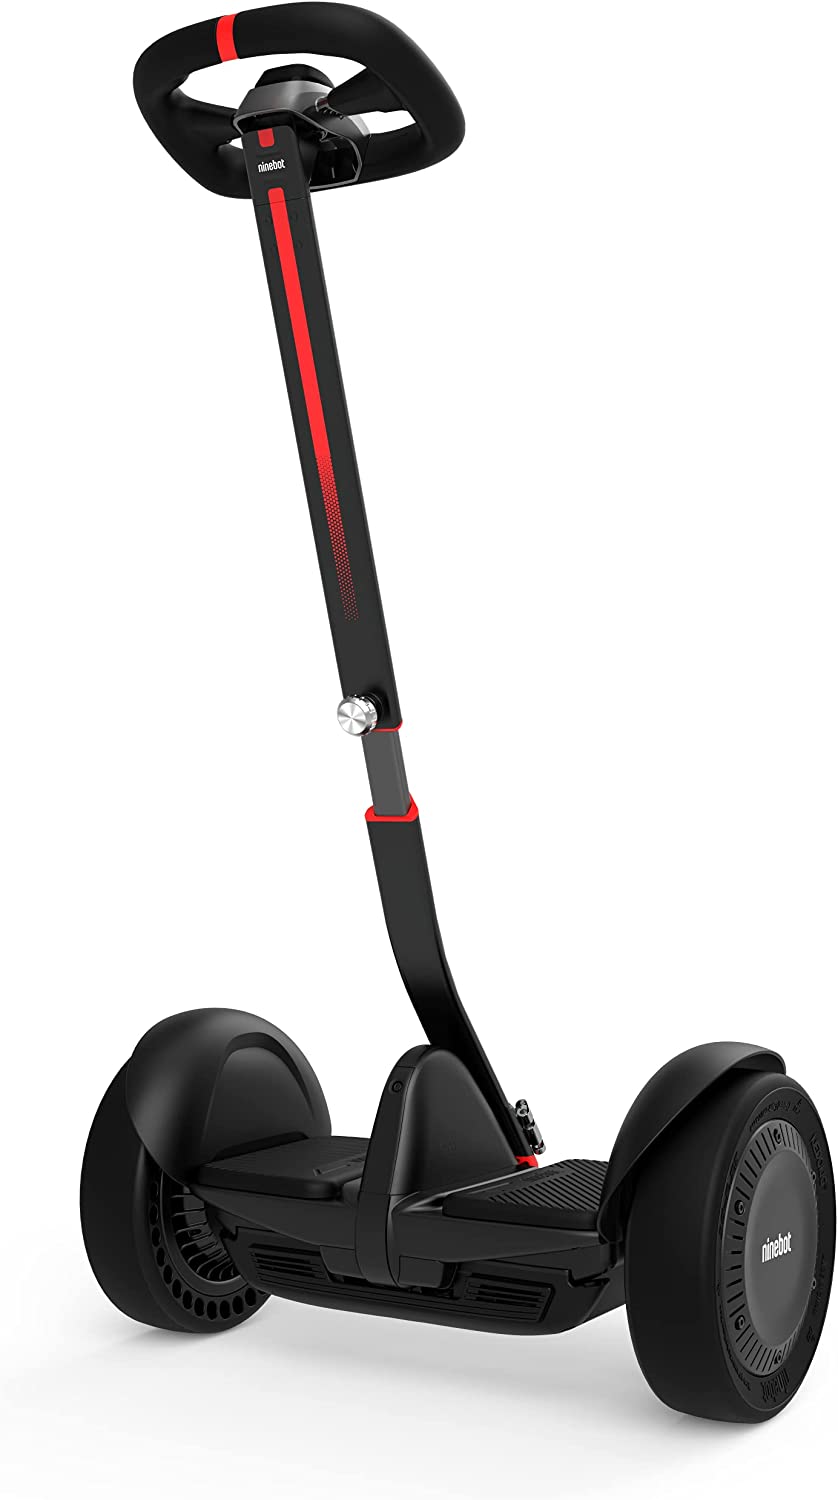 Segway Ninebot S And S-Max Smart Self-Balancing Electric Scooter With LED Light, Powerful And Portable, Compatible With Gokart Kit